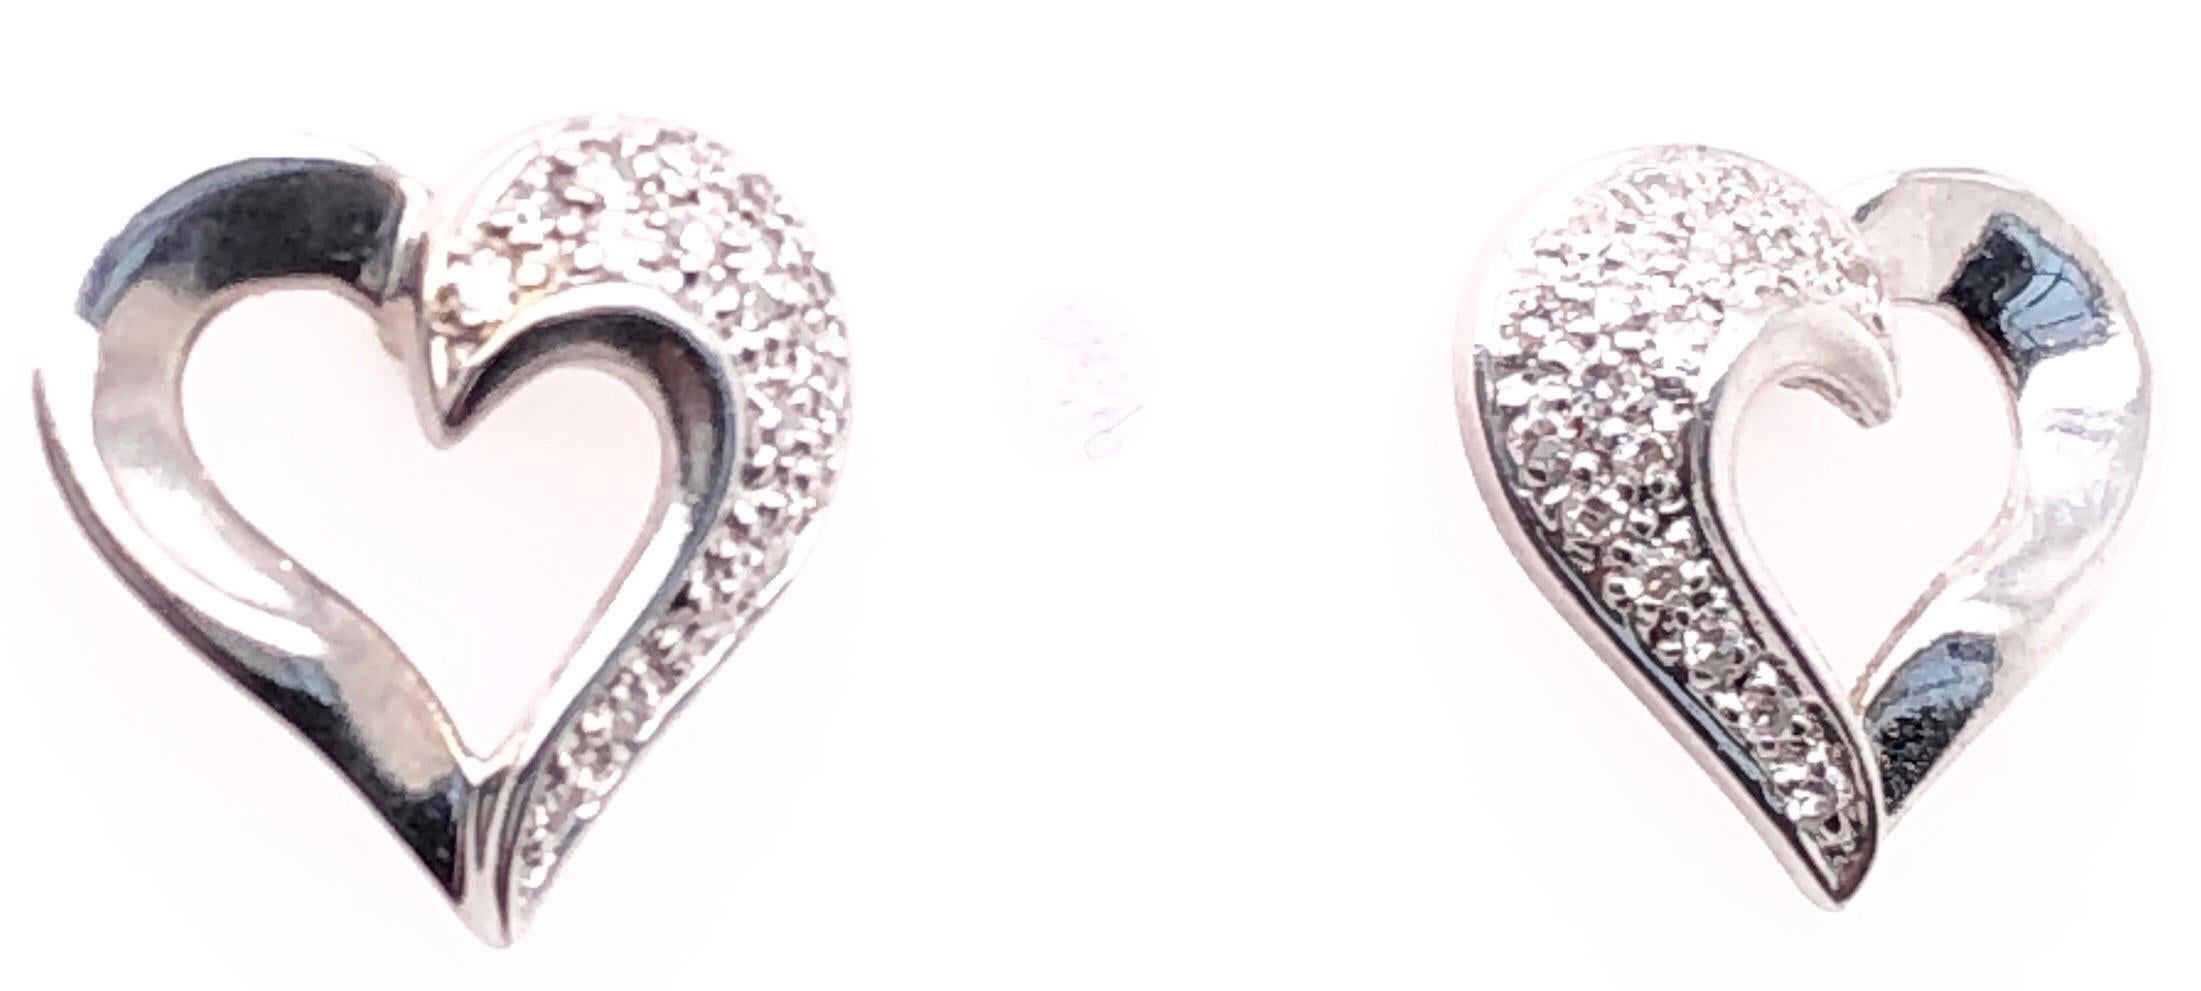 14 Karat White Gold Heart Shape Earrings with Diamonds.
1.00 total diamond weight.
2.74 grams total weight.